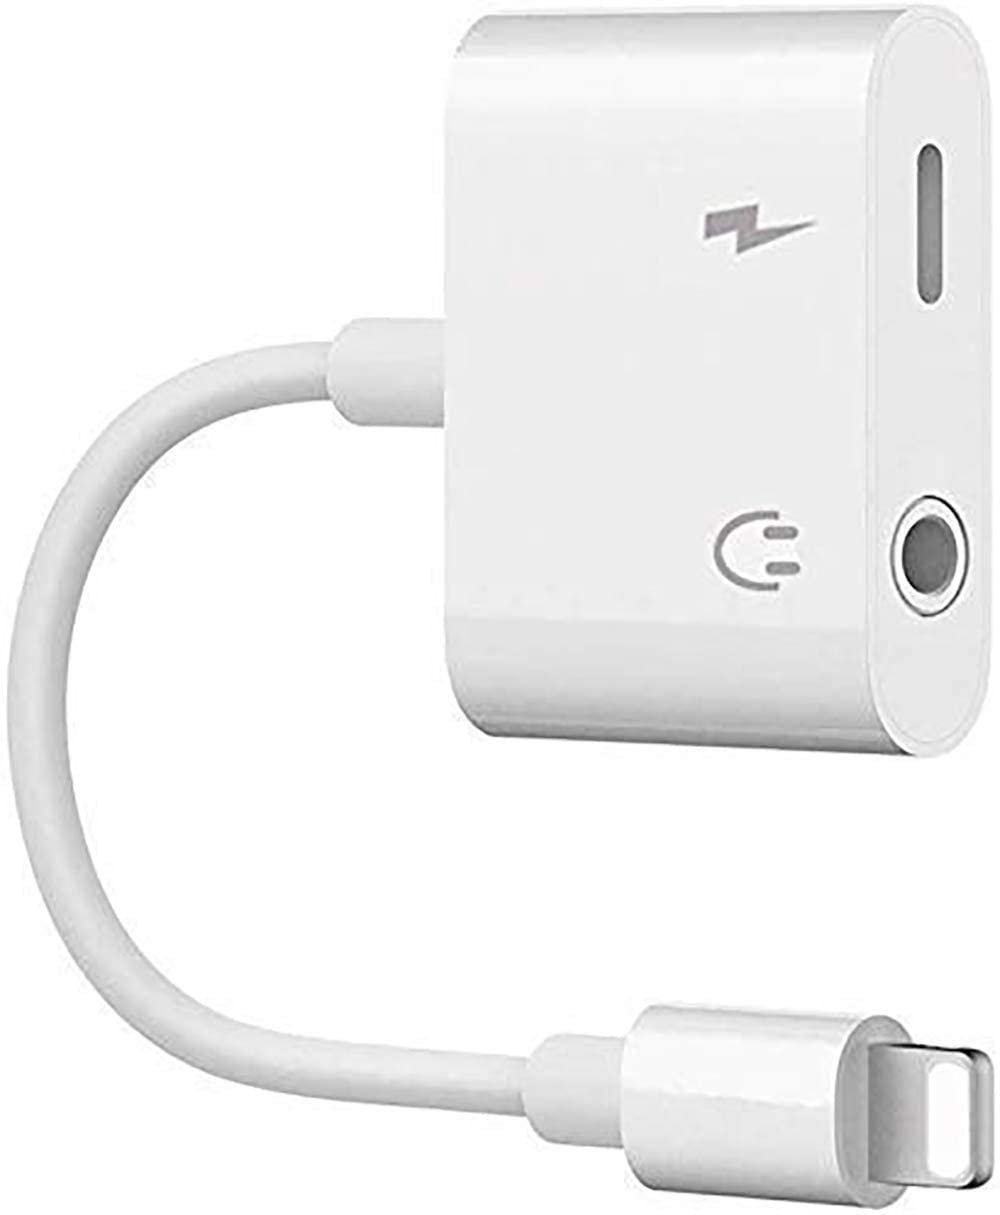 [Apple MFi Certified] iPhone Headphone Adapter & Splitter, 2 in 1 Lightning to 3.5mm Headphone Audio & Charger for iPhone 11/11 Pro/XS/XR/X/8 7 6, iPad, iPod, Support Calling & Music Control & iOS 13